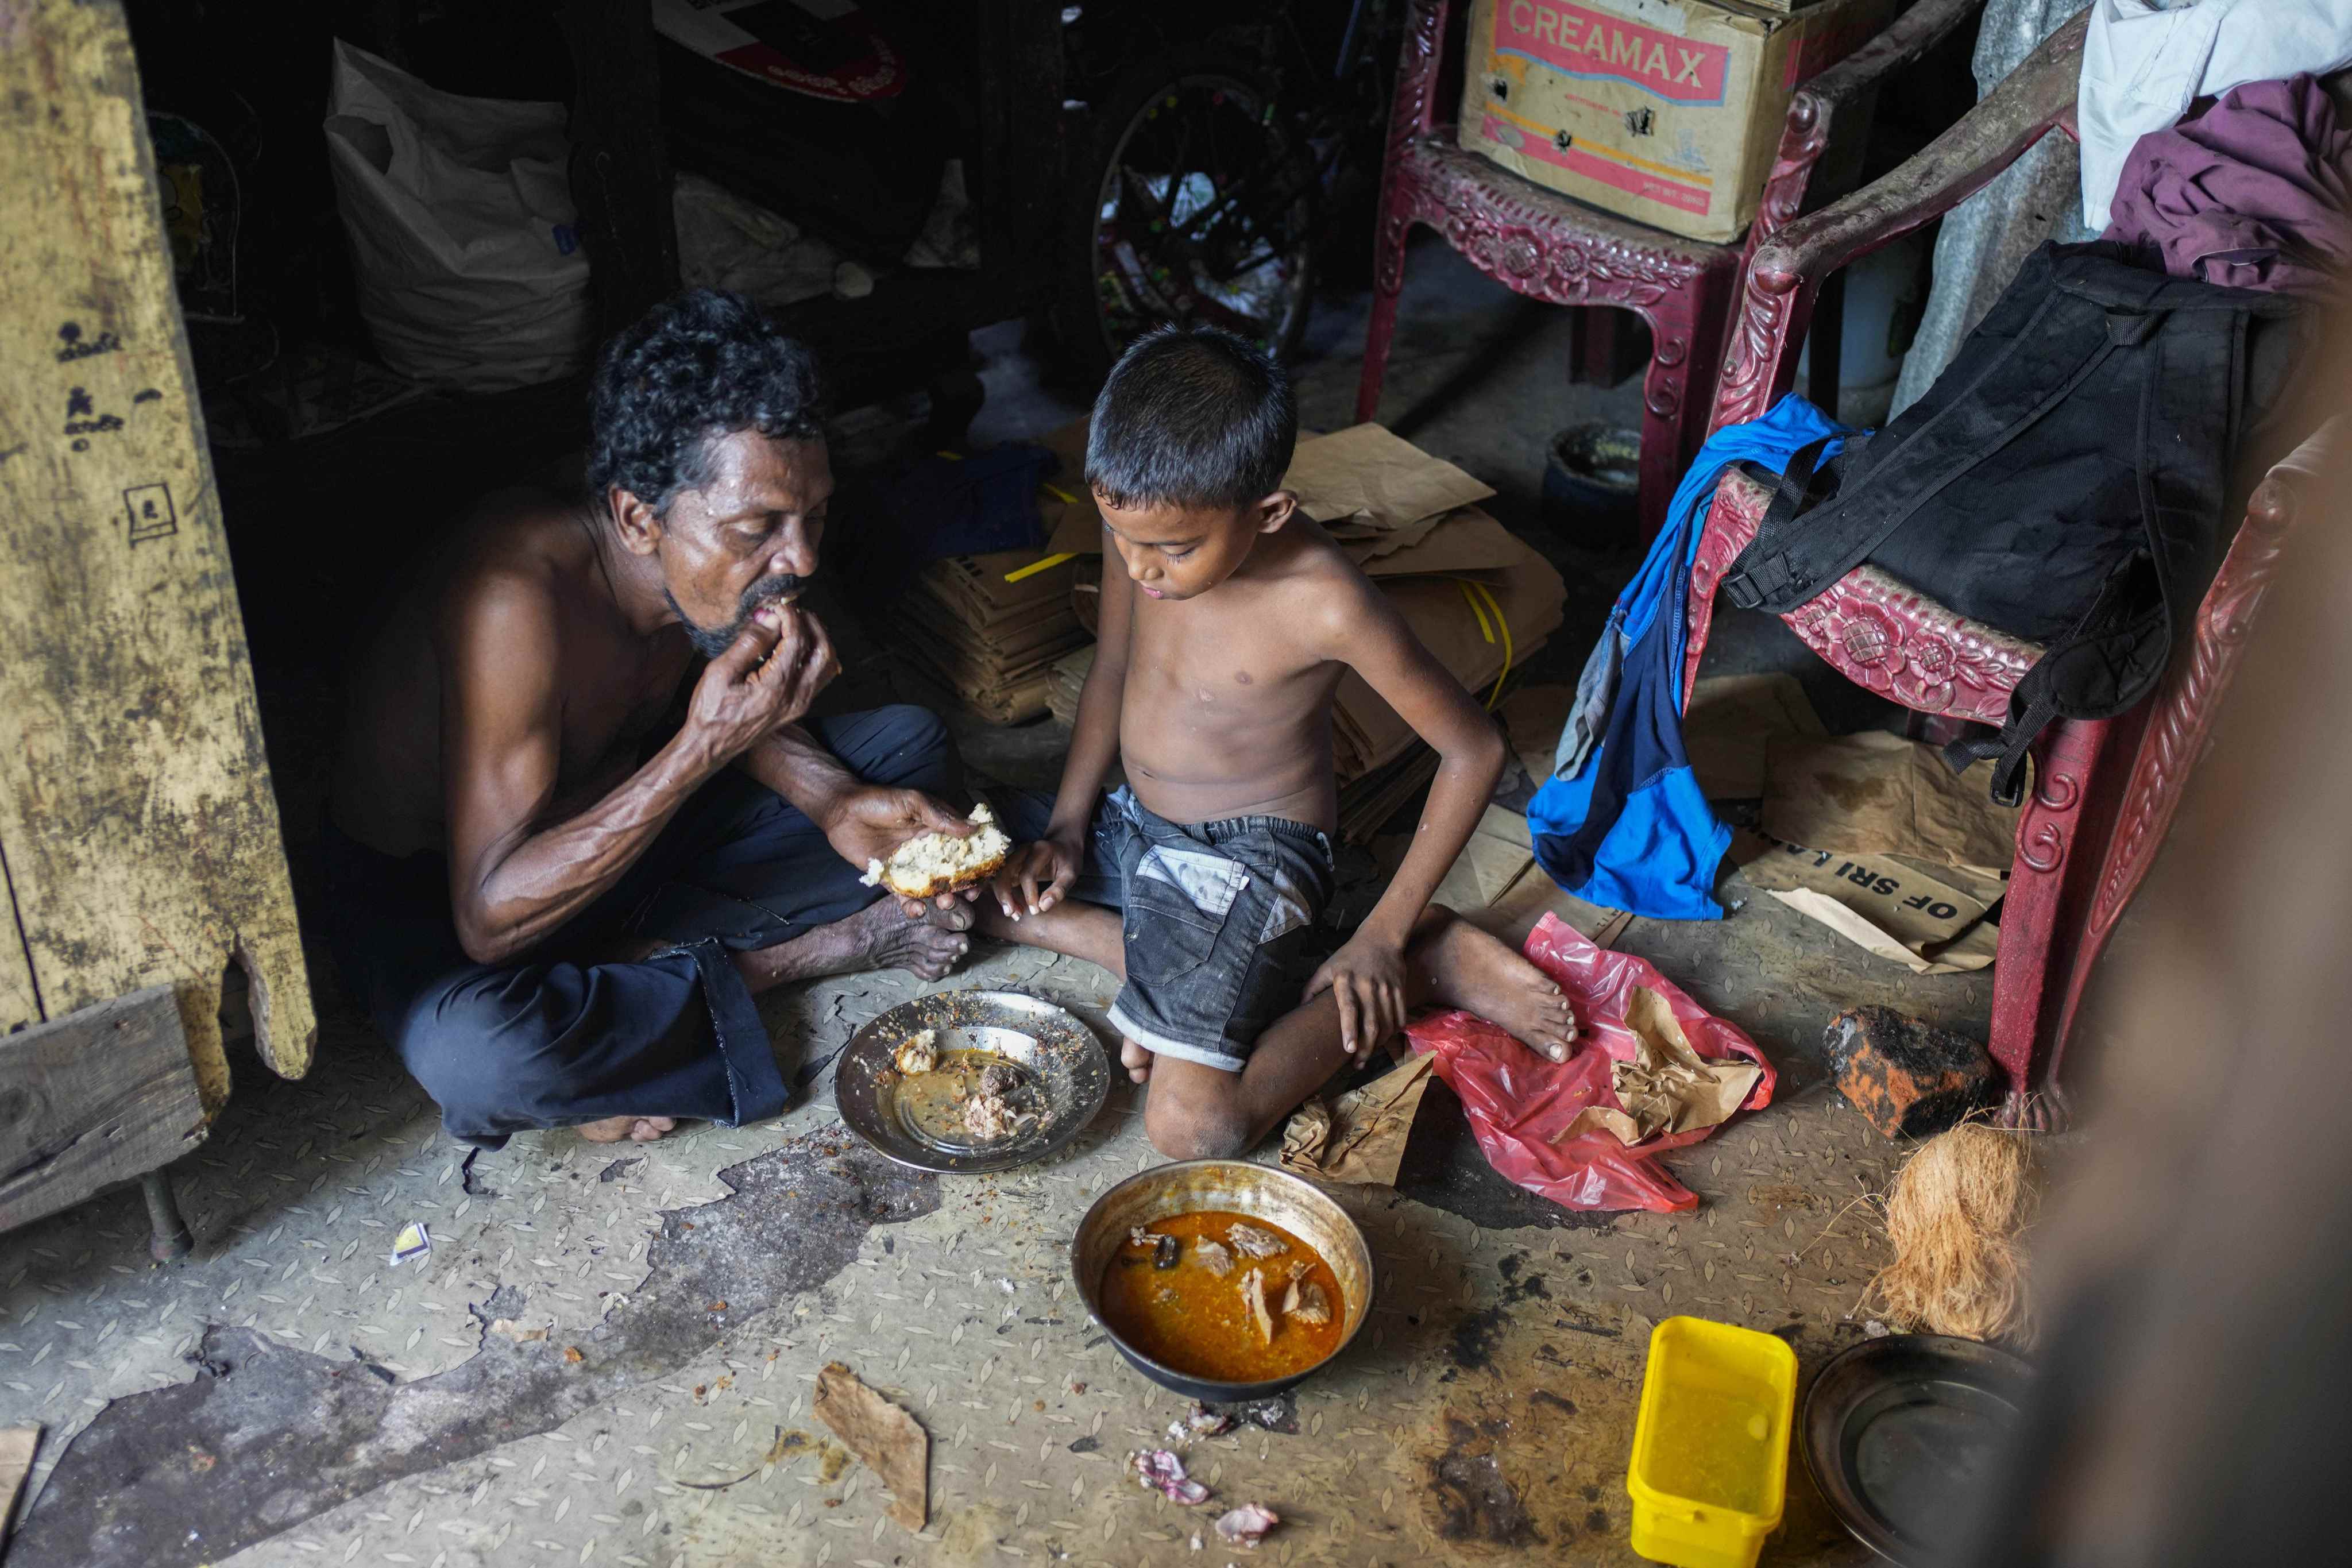 A father and son share a meal at their shanty home in Colombo, Sri Lanka, on October 5. The country is currently facing its worst economic crisis in decades. Photo: AP